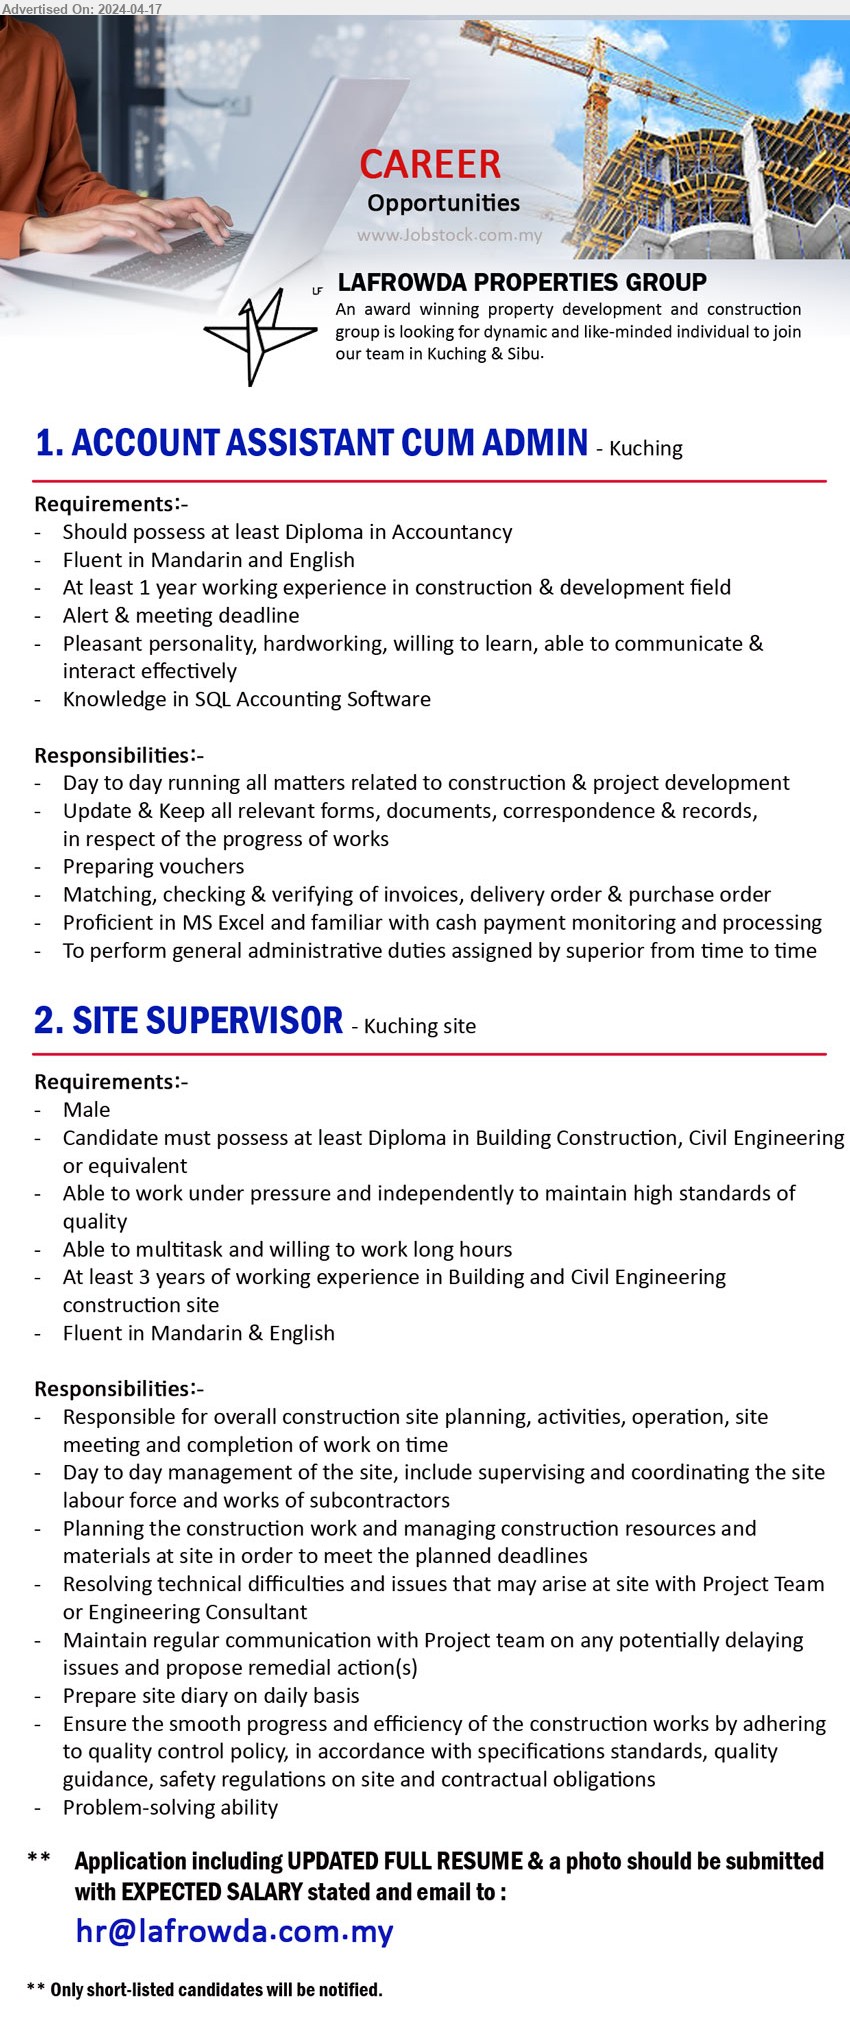 LAFROWDA PROPERTIES GROUP - 1. ACCOUNT ASSISTANT CUM ADMIN (Kuching), Diploma in Accountancy, At least 1 year working experience in construction & development field, Knowledge in SQL Accounting Software...
2. SITE SUPERVISOR (Kuching Site), Male, Diploma in Building Construction, Civil Engineering, 3 yrs. exp....
Email resume to ...
